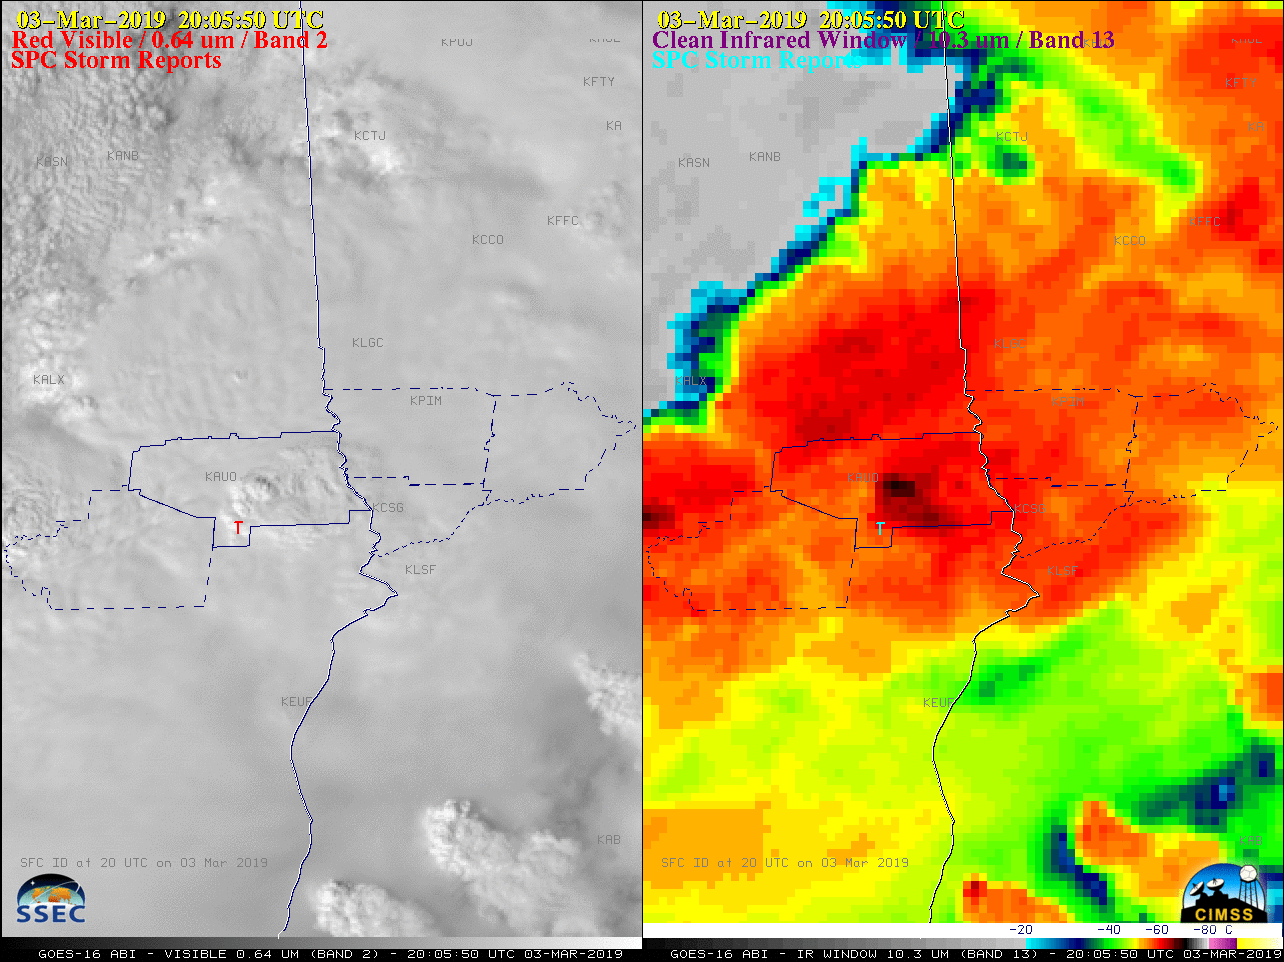 GOES-16 "Clean" Infrared Window (10.3 µm) images, with SPC storm reports plotted in cyan [click to play animation | MP4]